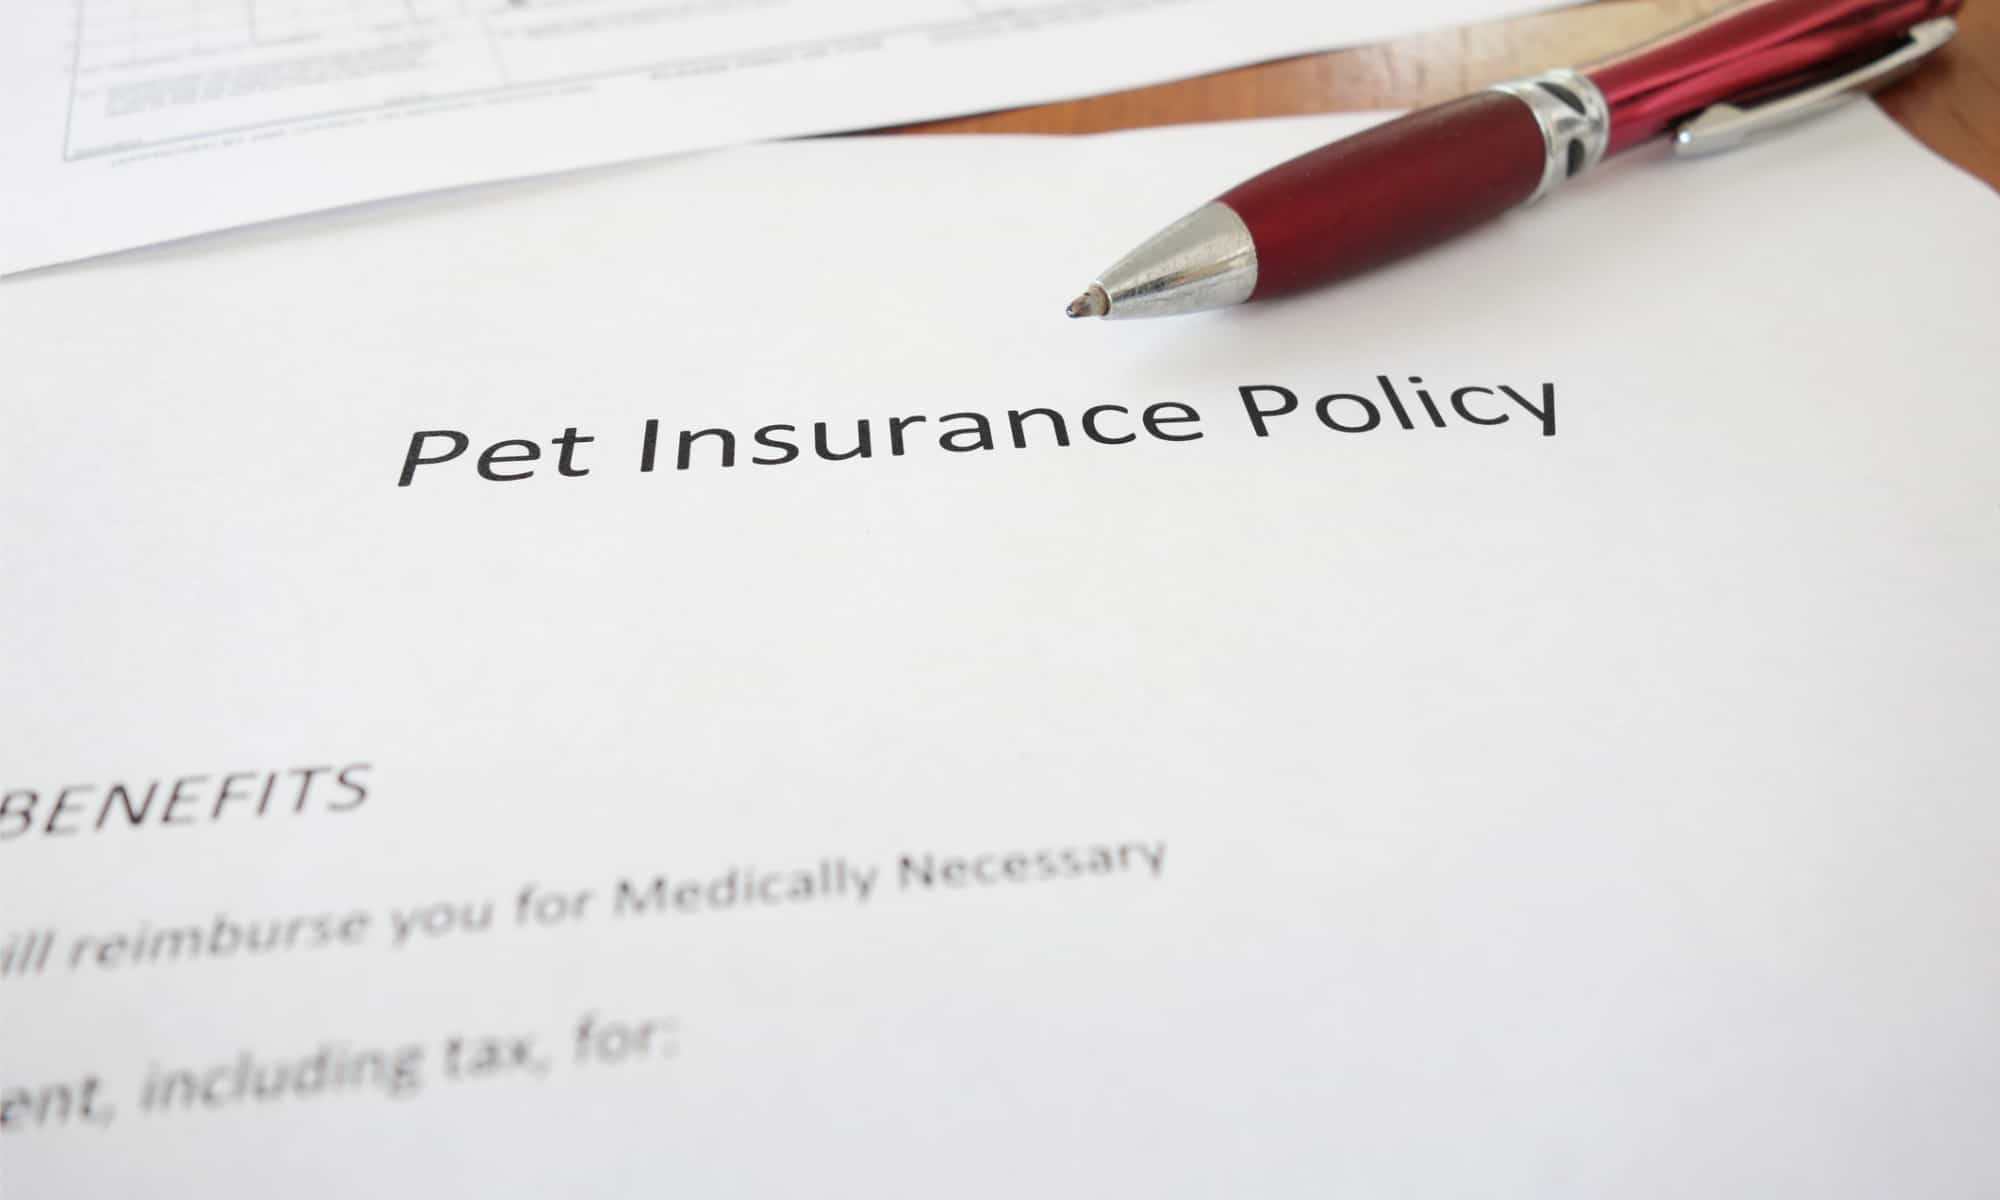 A pen on top of a pet insurance policy form